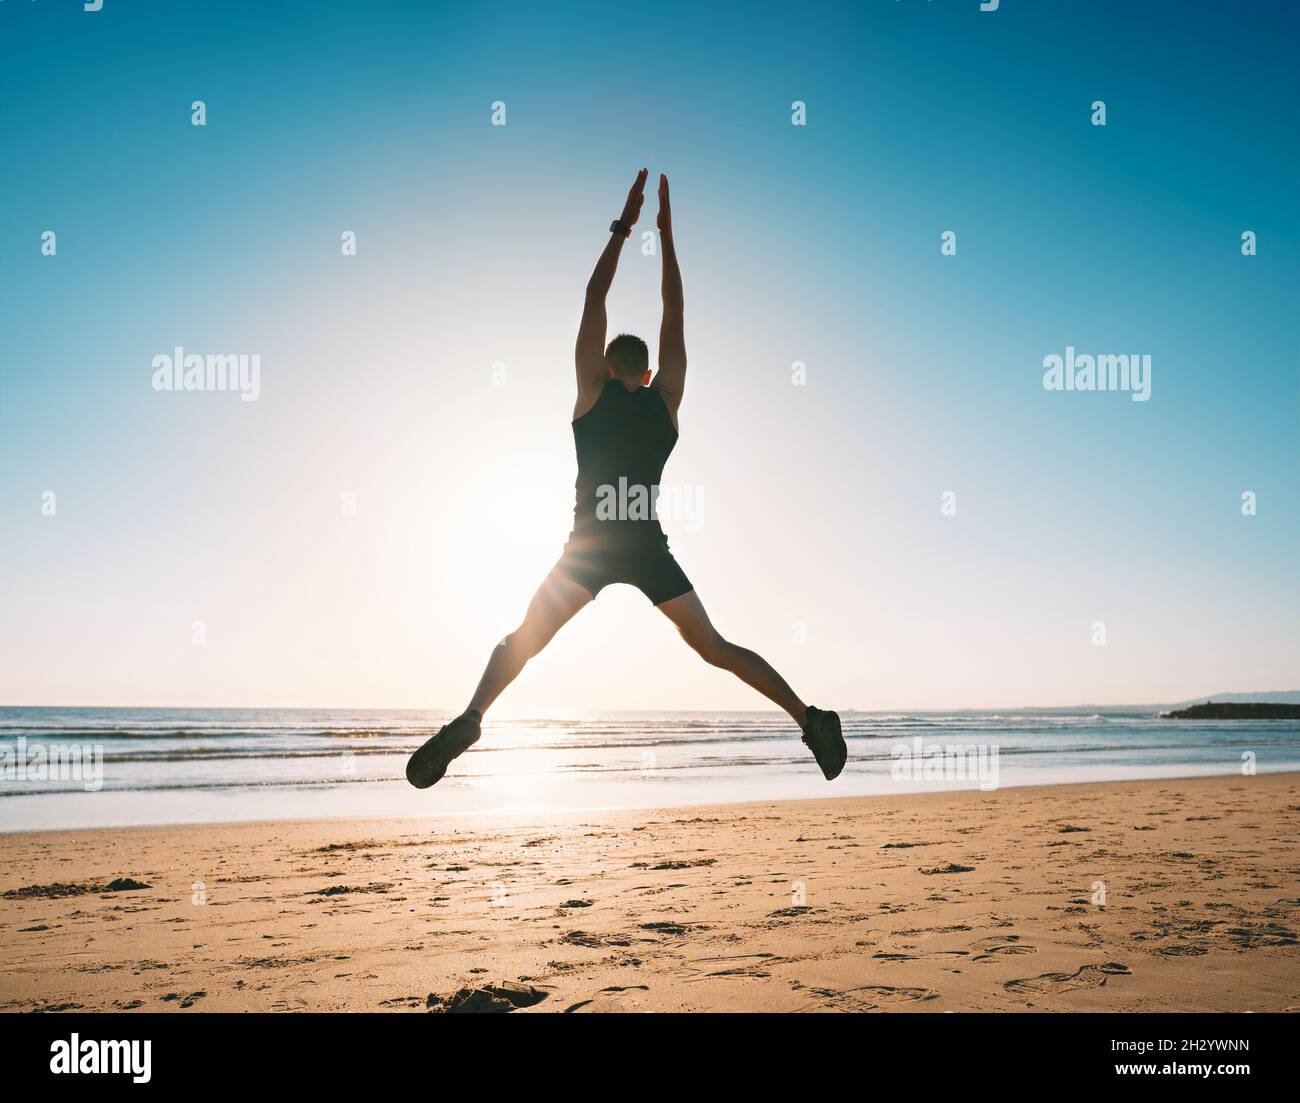 Jumping man. Young fitness man doing jumping jacks or star jump exercise on the beach Stock Photo